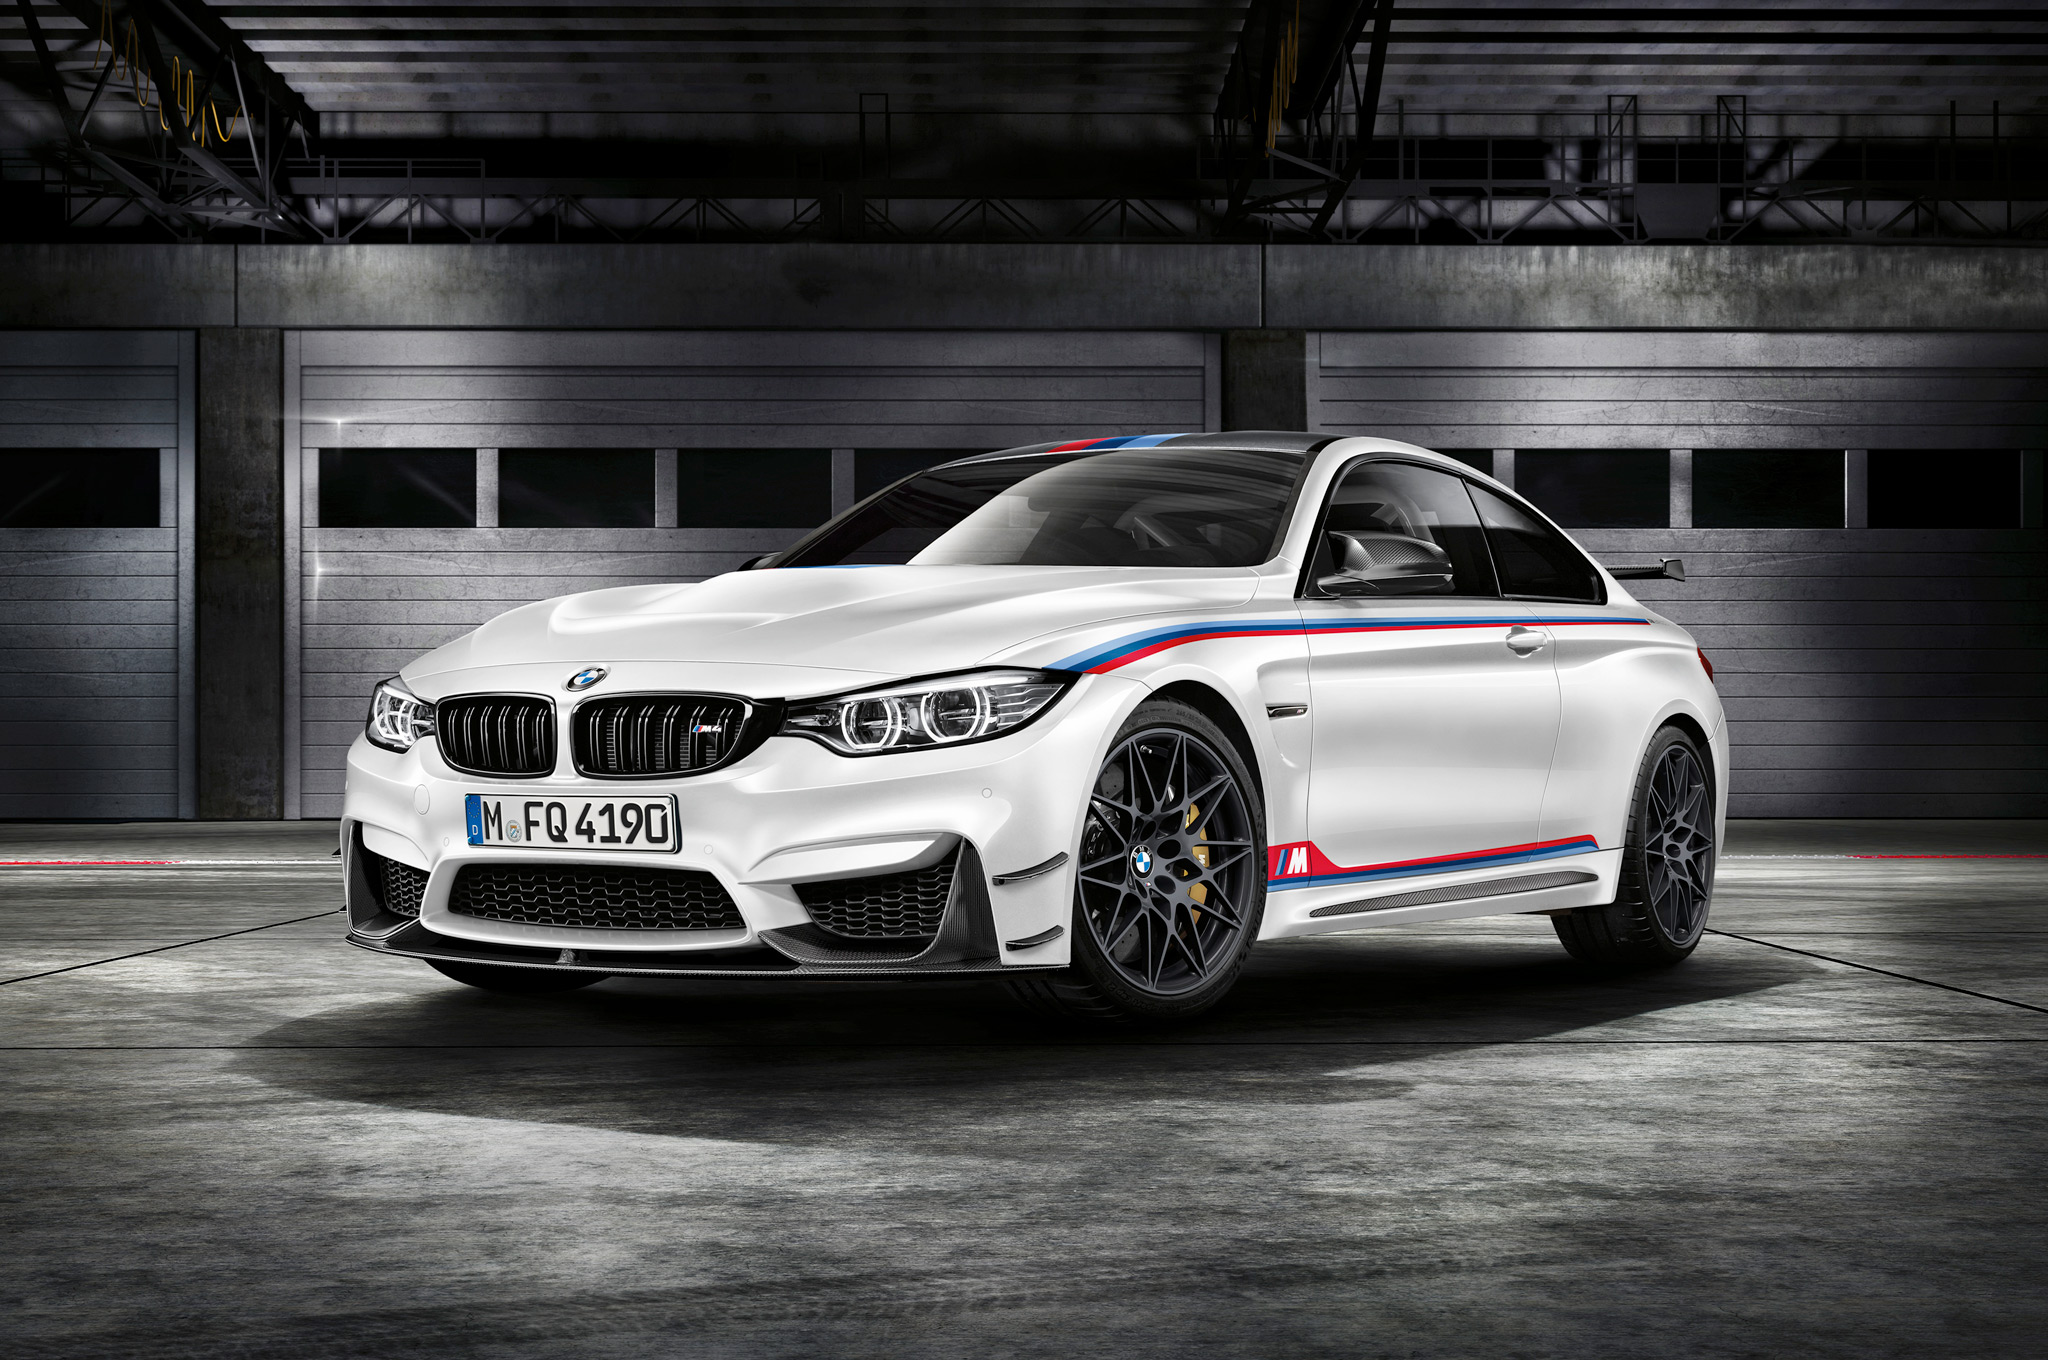 Amazing BMW M4 Pictures & Backgrounds